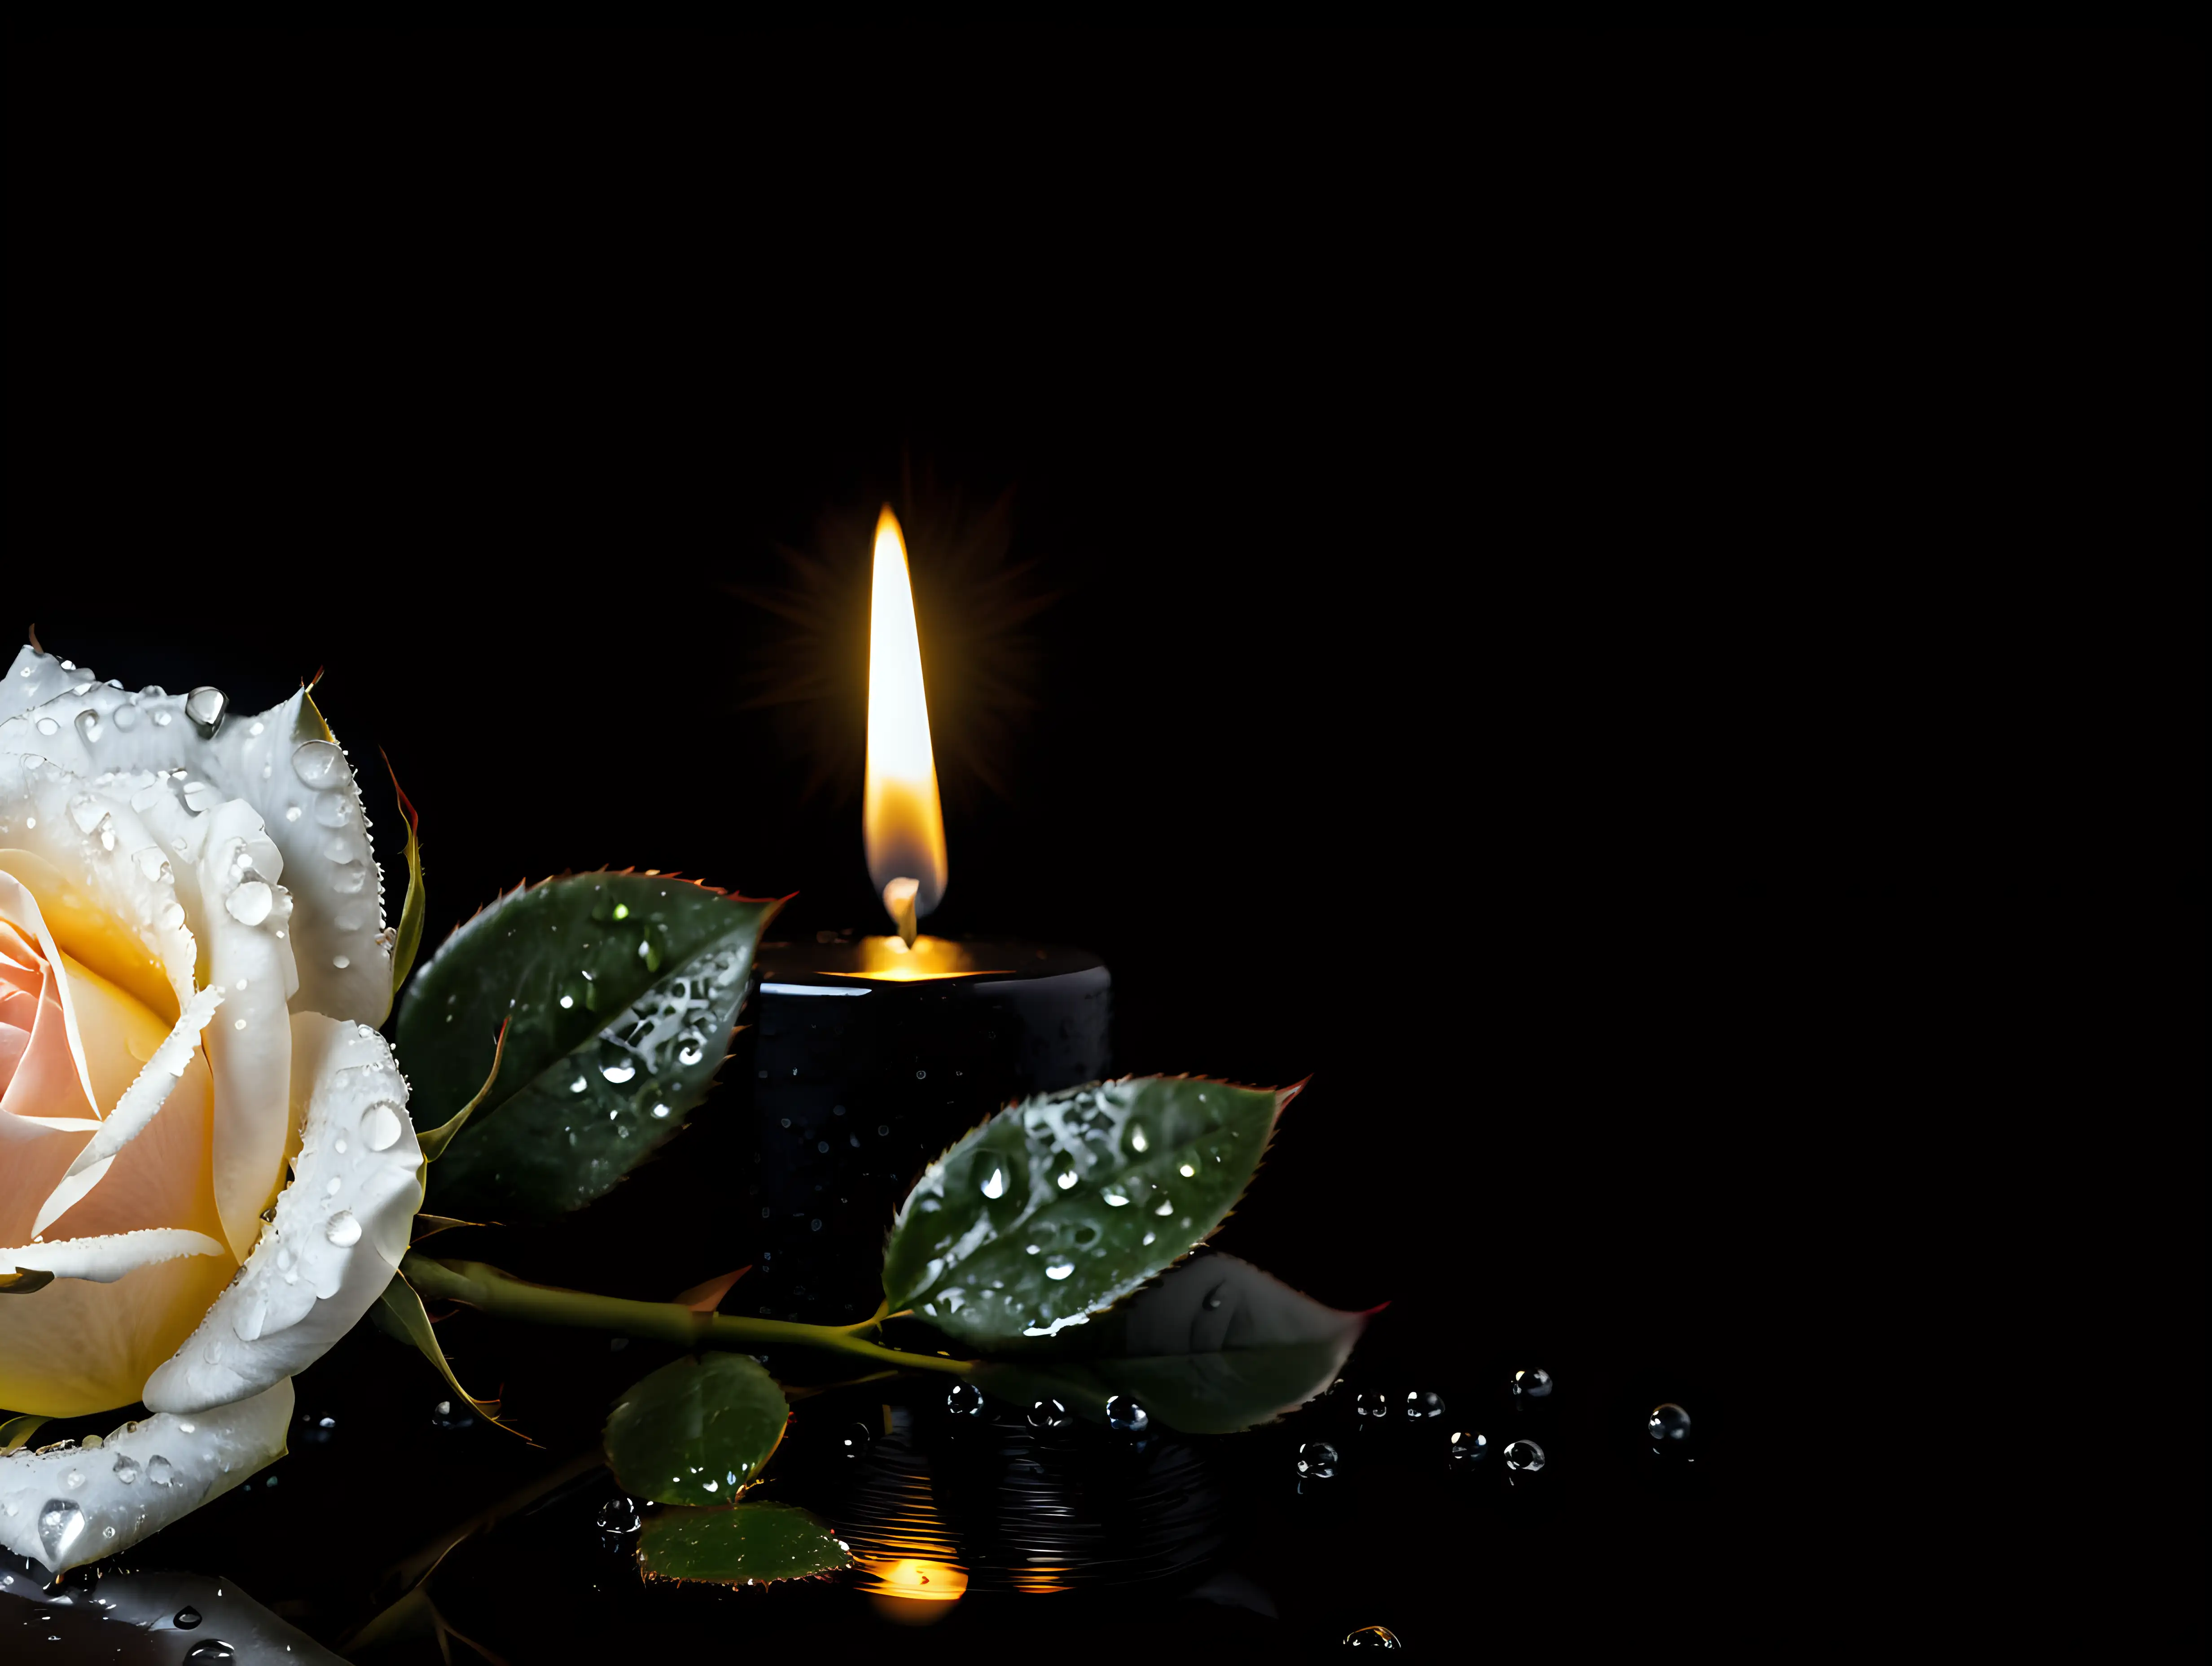 hyperrealistic small rose covered with raindrops, next to a candle, black solid background